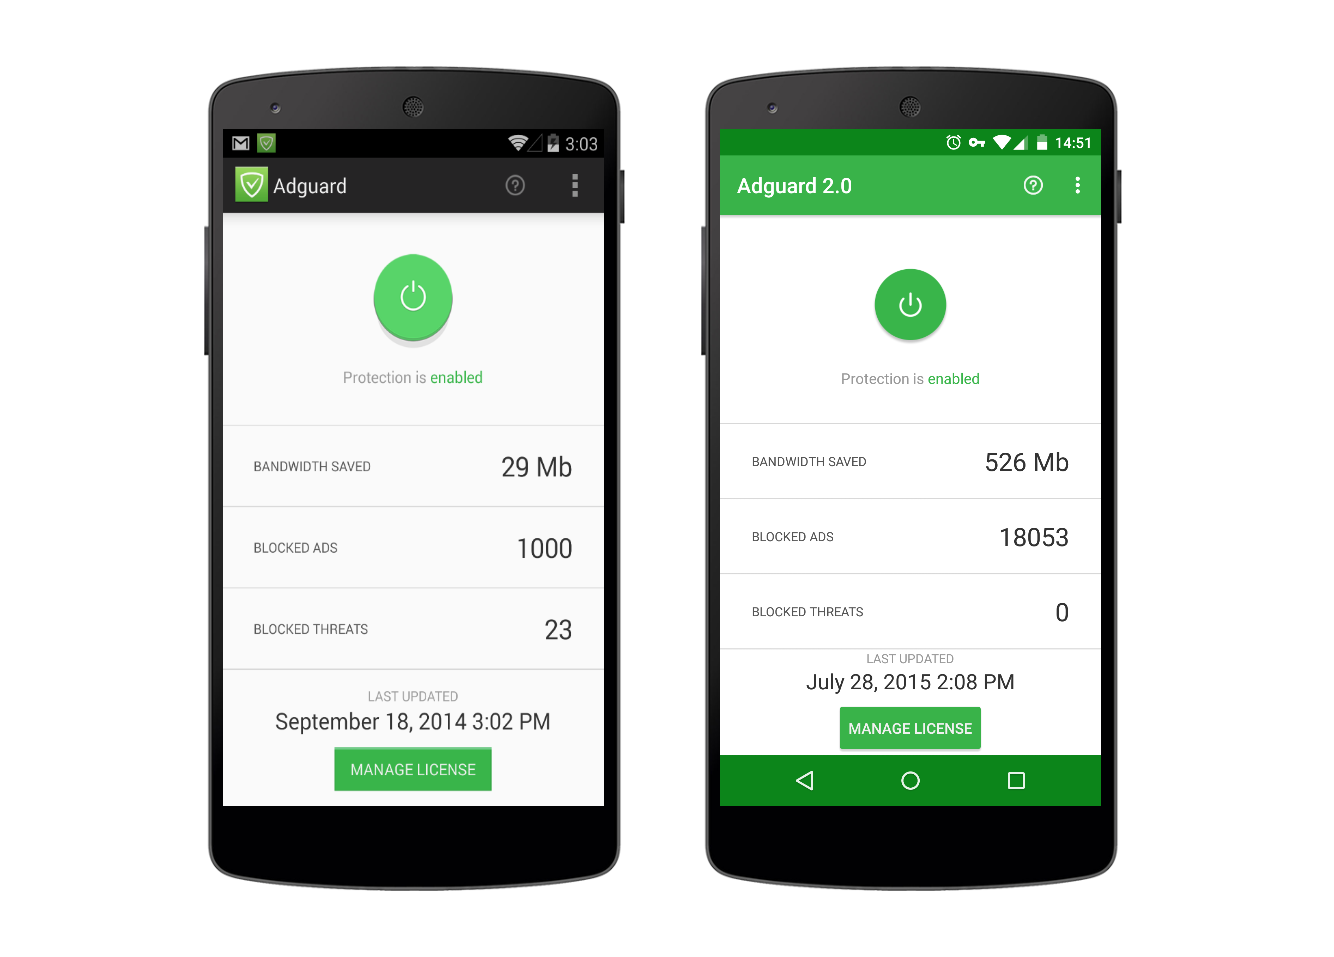 Adguard for Android 2.0